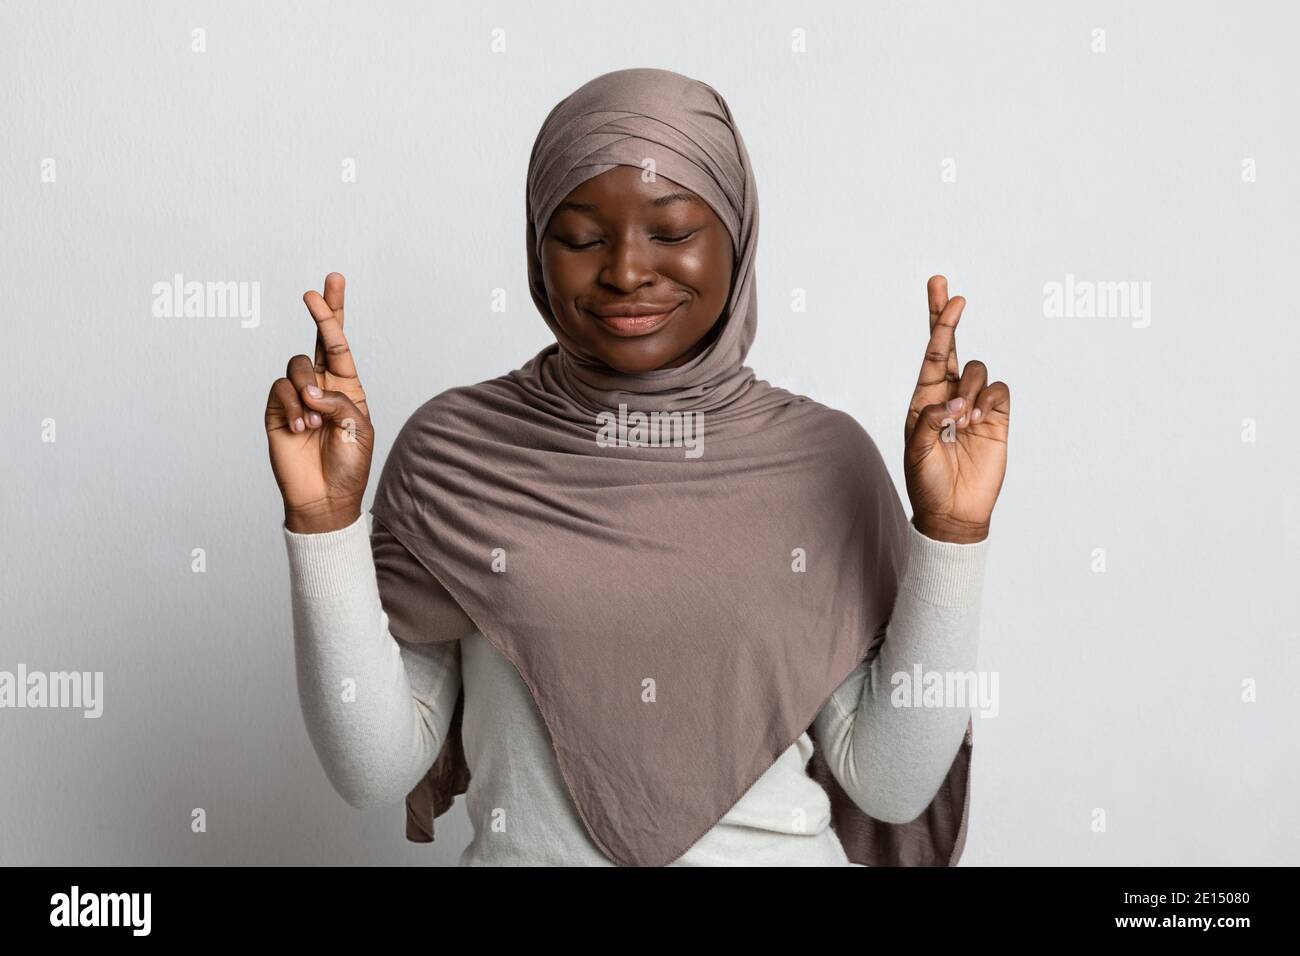 Superstitious Black Muslim Woman In Hijab Making Wish With Crossed Fingers Stock Photo